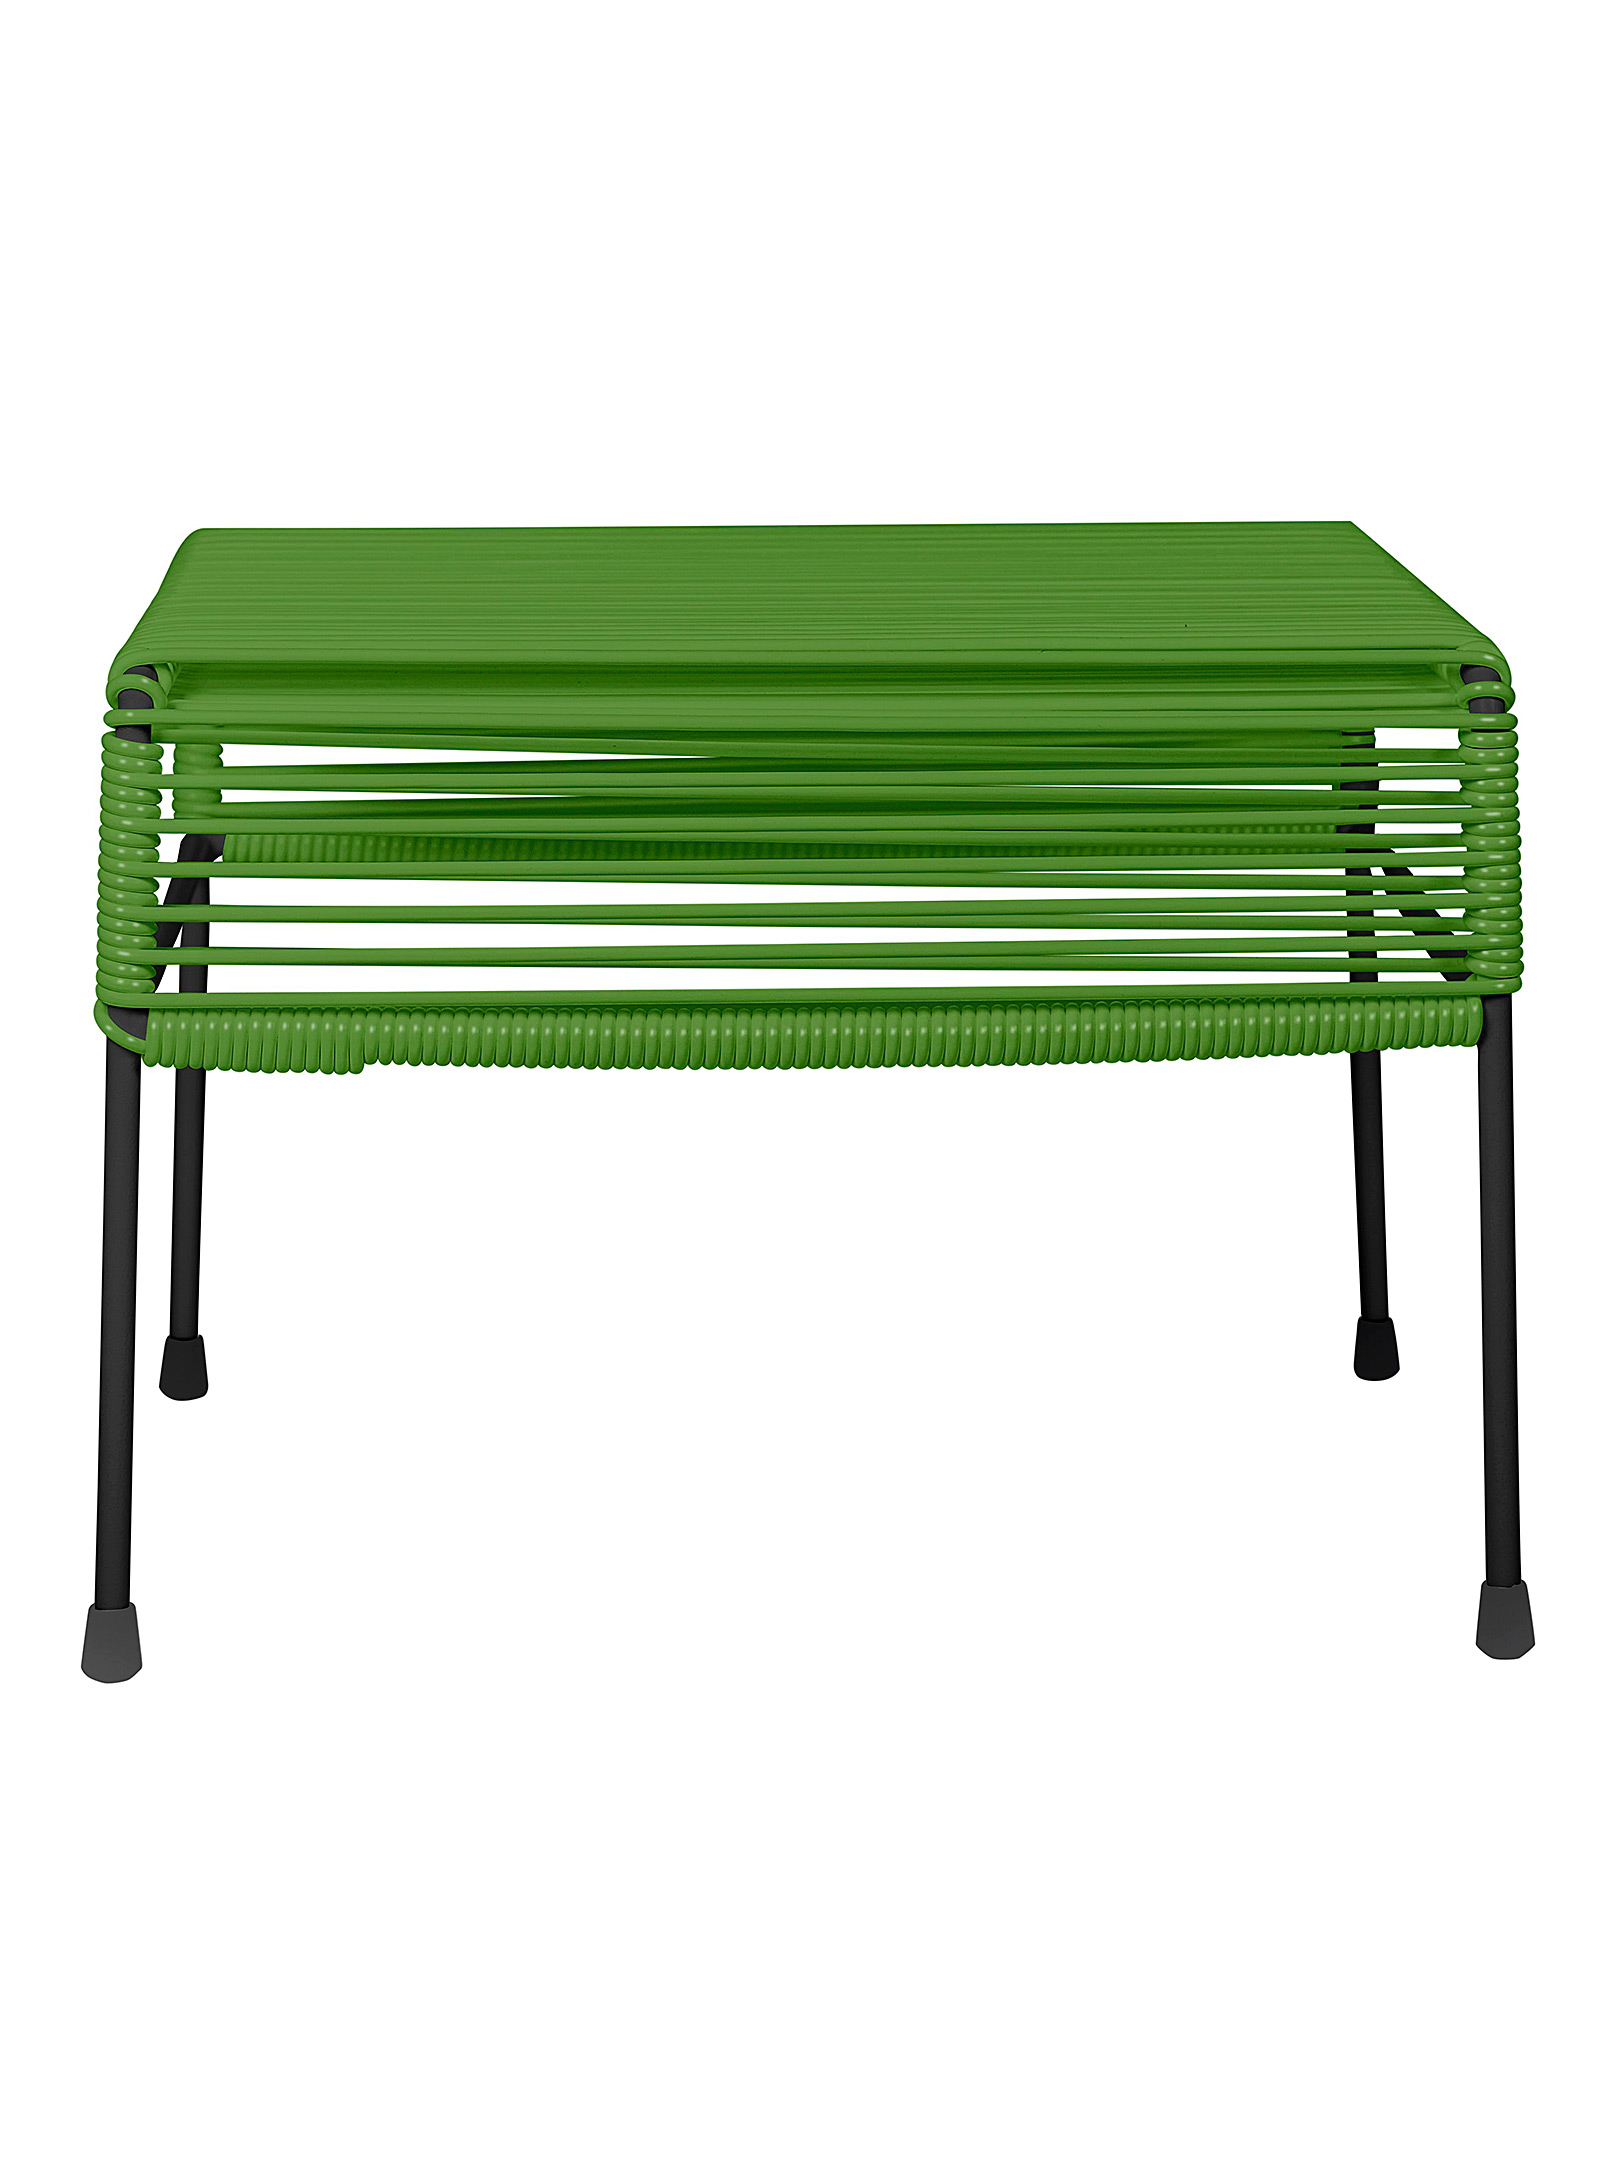 Simons Maison Atom Small Outdoor Table In Green